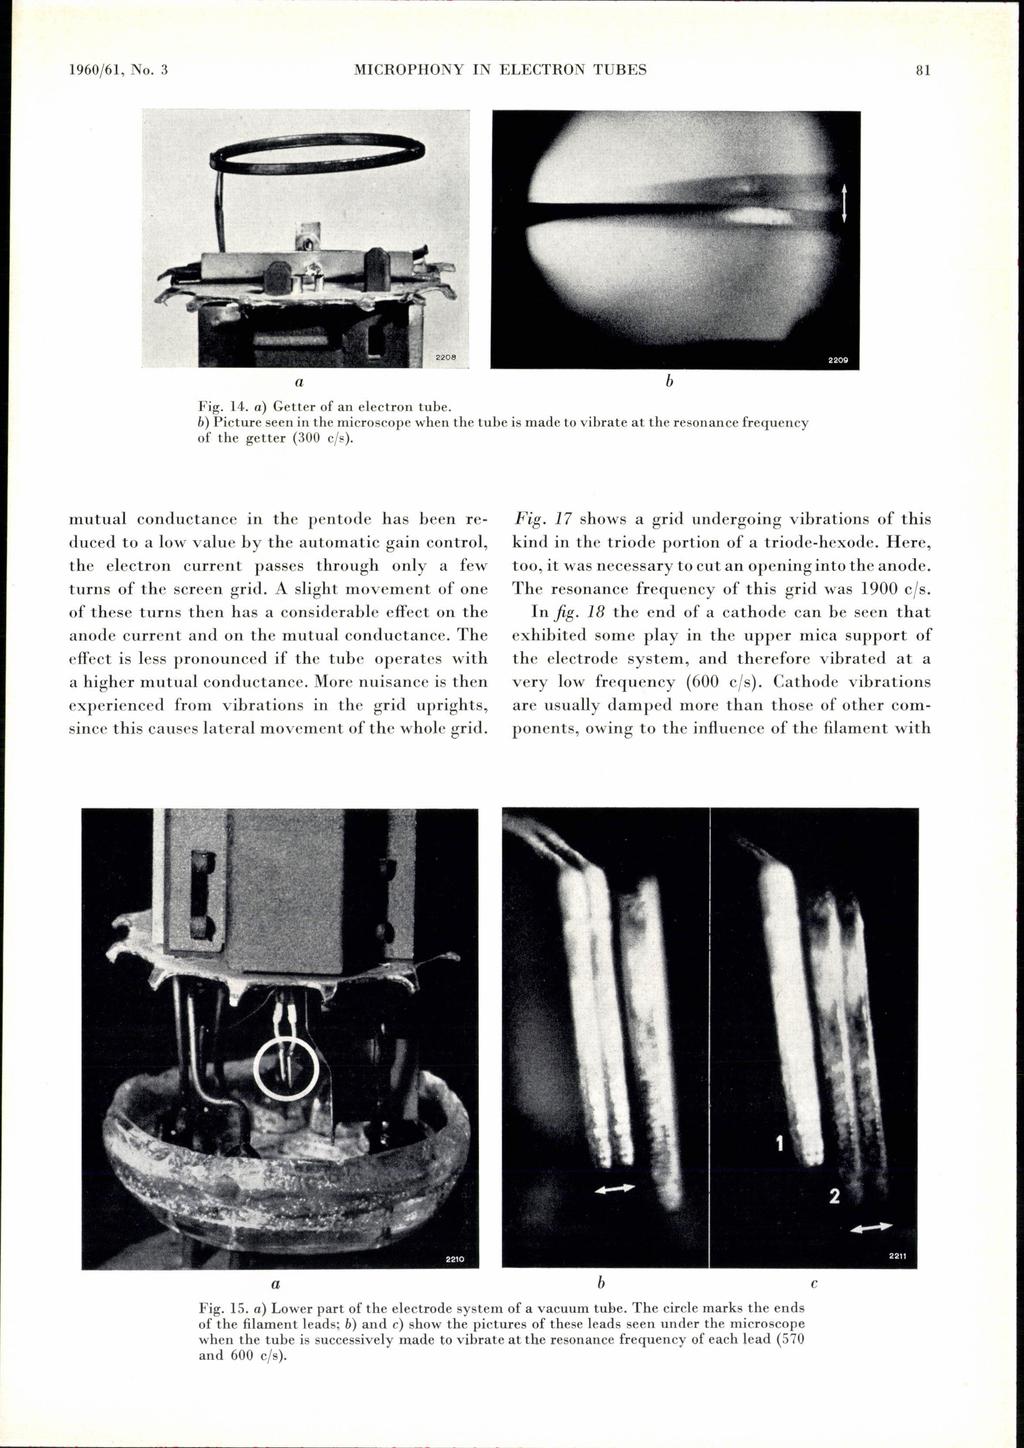 1960j61, No. 3 MICROPHONY IN ELECTRON TUBES 81 Fig. 14. ) Getter of n electron tue. ) Picture seen in the microscope when the tue is mde to virte t the resonnce frequency of the getter (300 cjs).